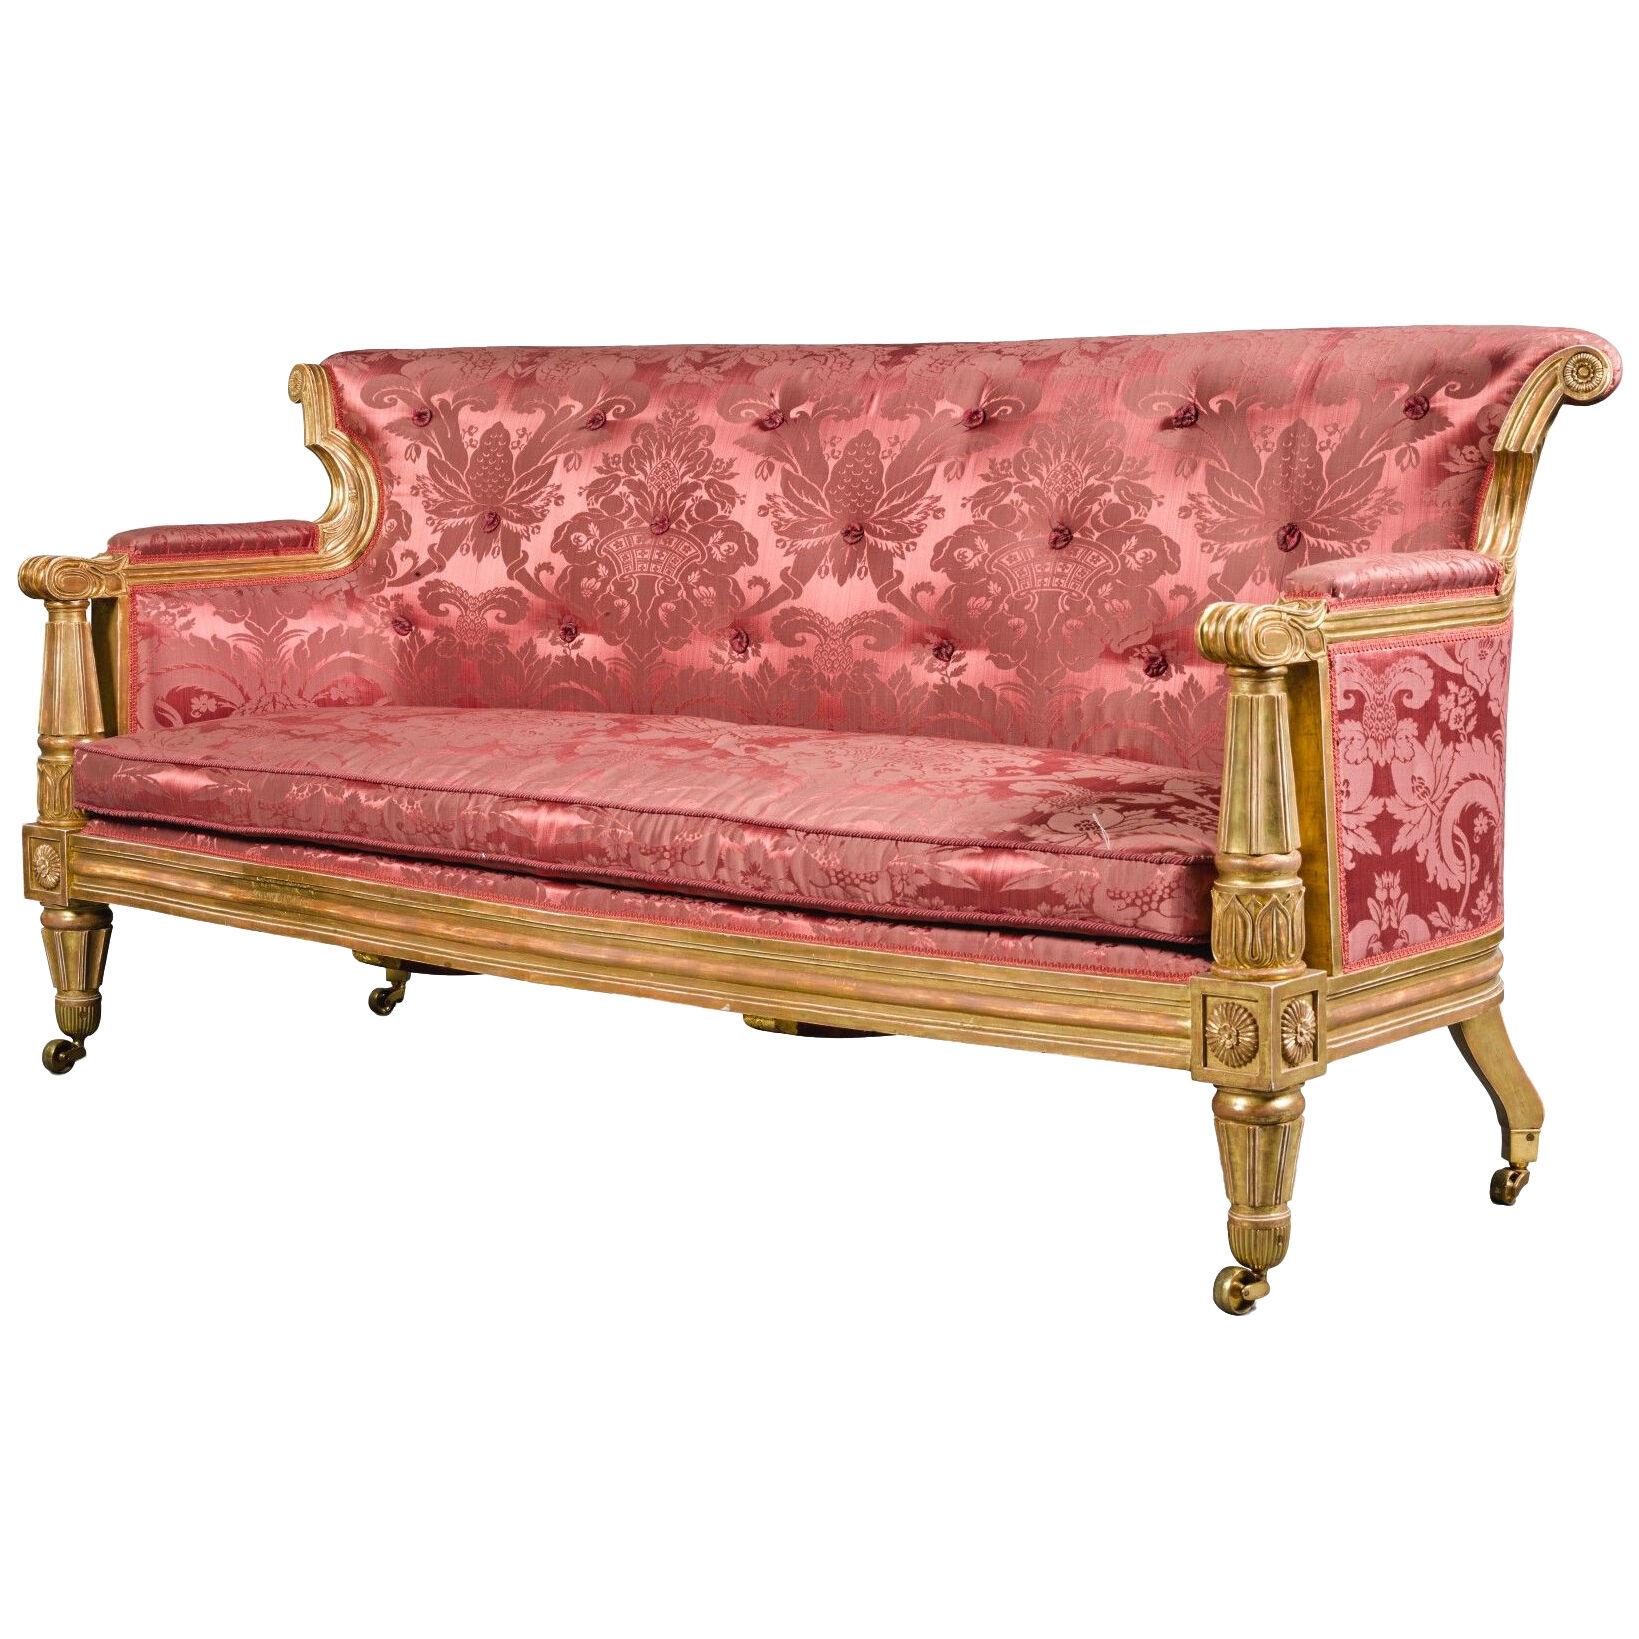 A ROYAL CARVED GILTWOOD SOFA, TO DESIGNS BY GEORGE SMITH, STAMPED WINDSOR CASTLE